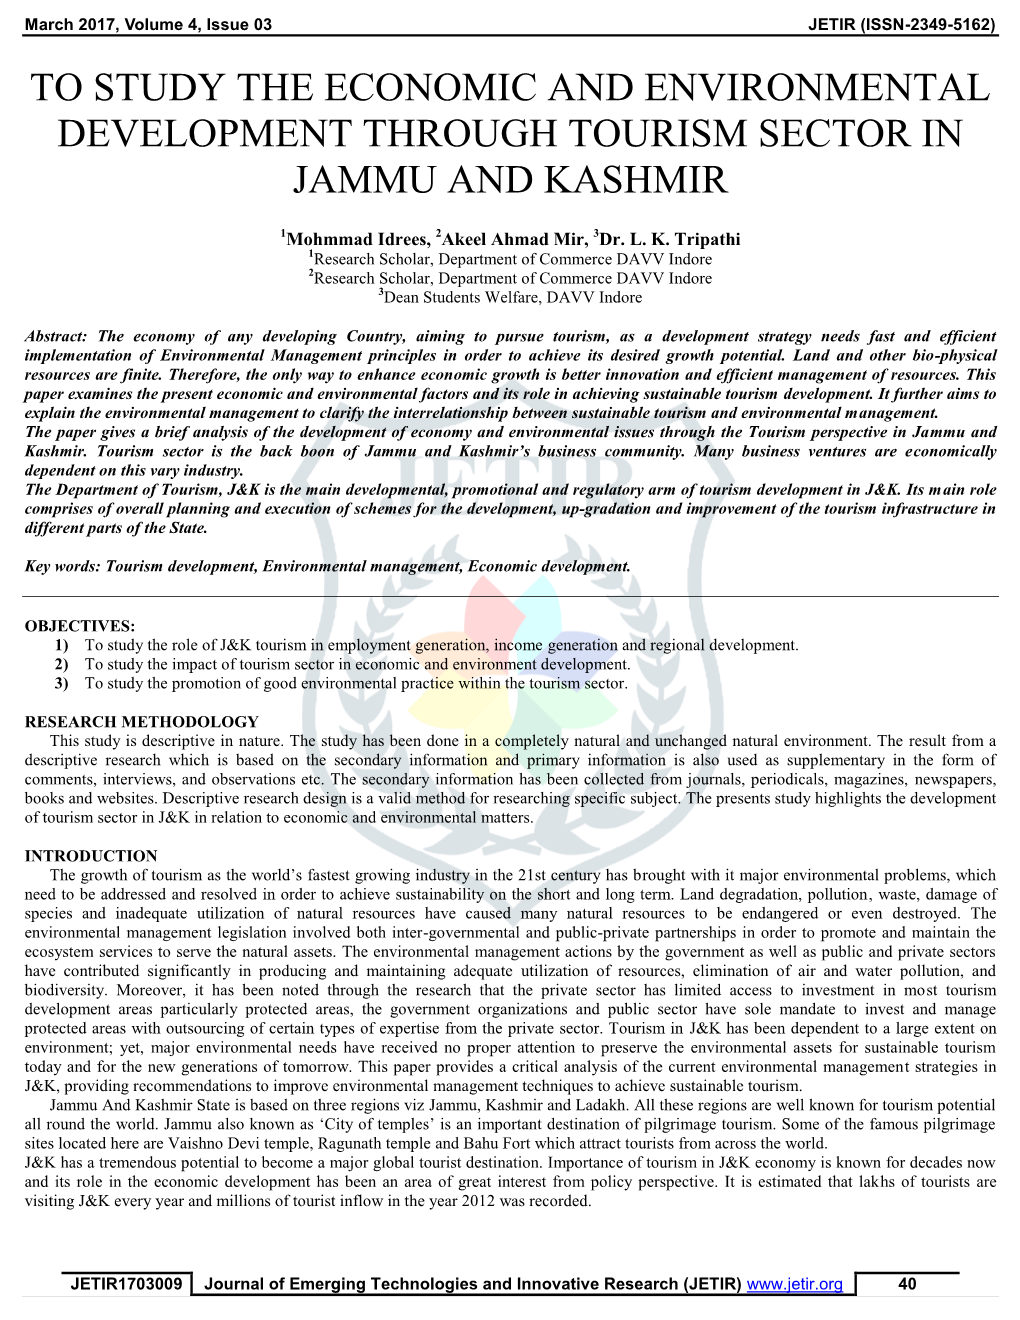 To Study the Economic and Environmental Development Through Tourism Sector in Jammu and Kashmir